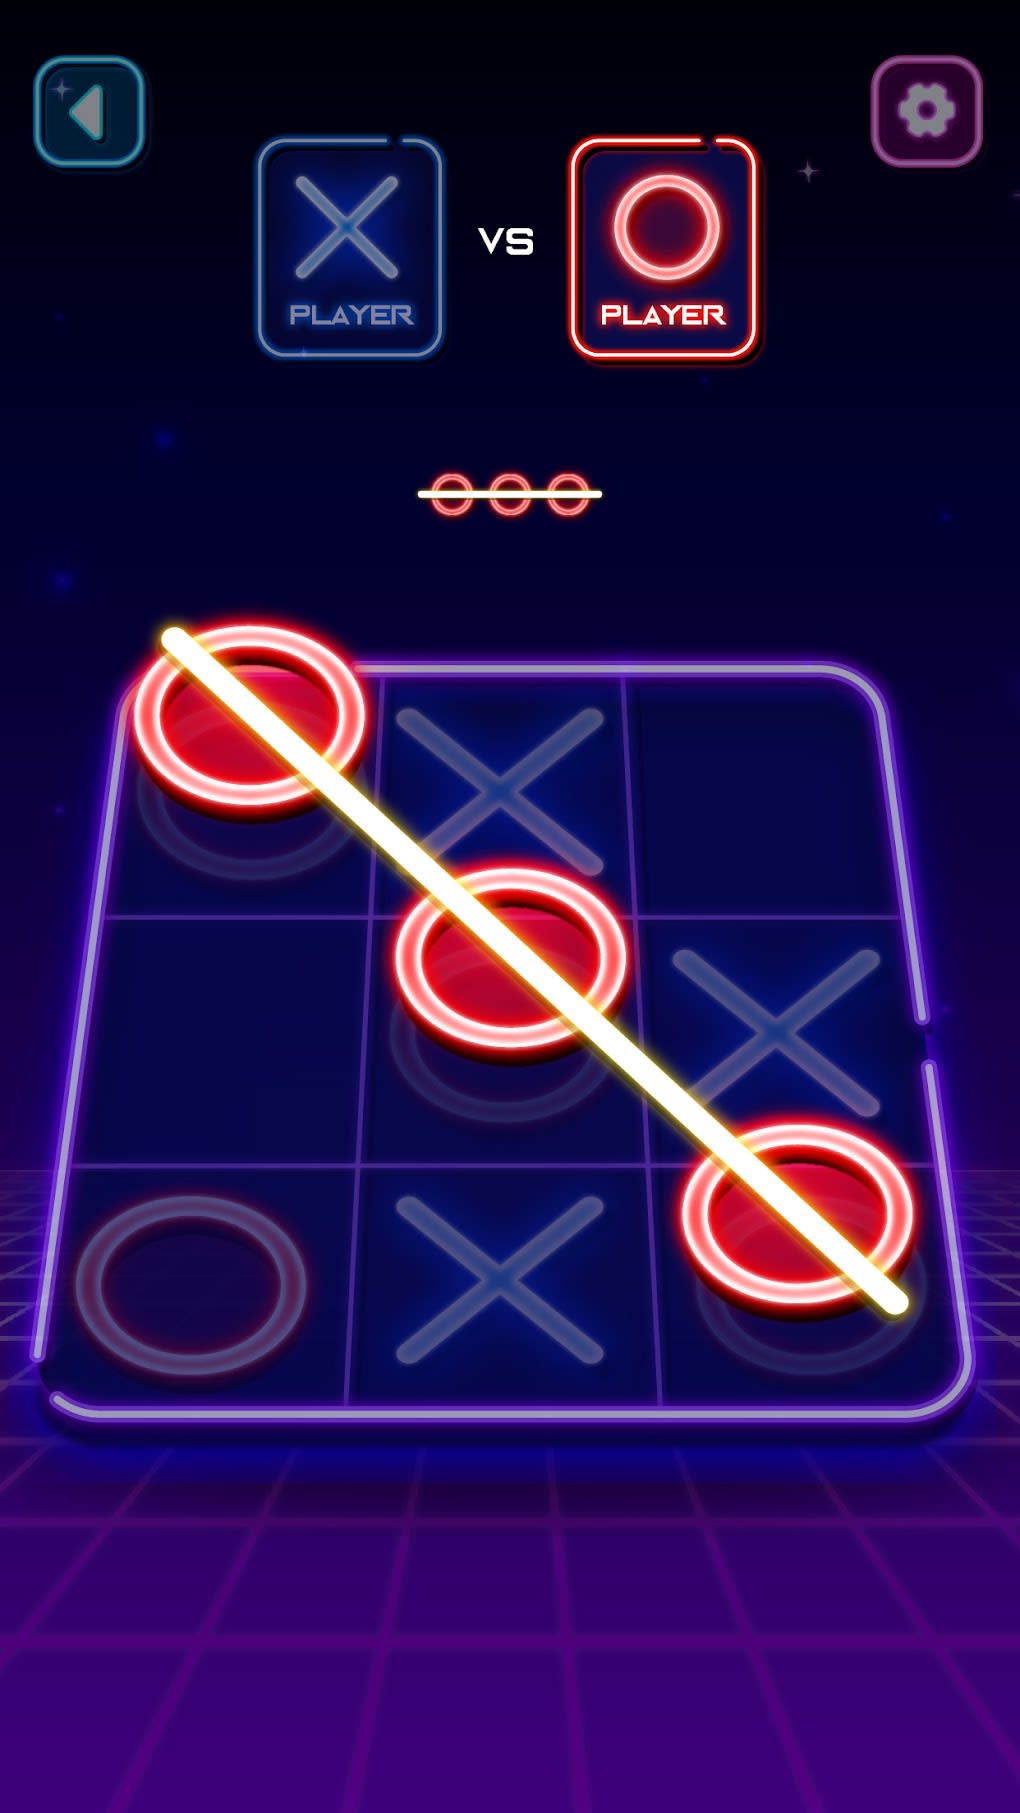 Tic Tac Toe Glow APK for Android - Download